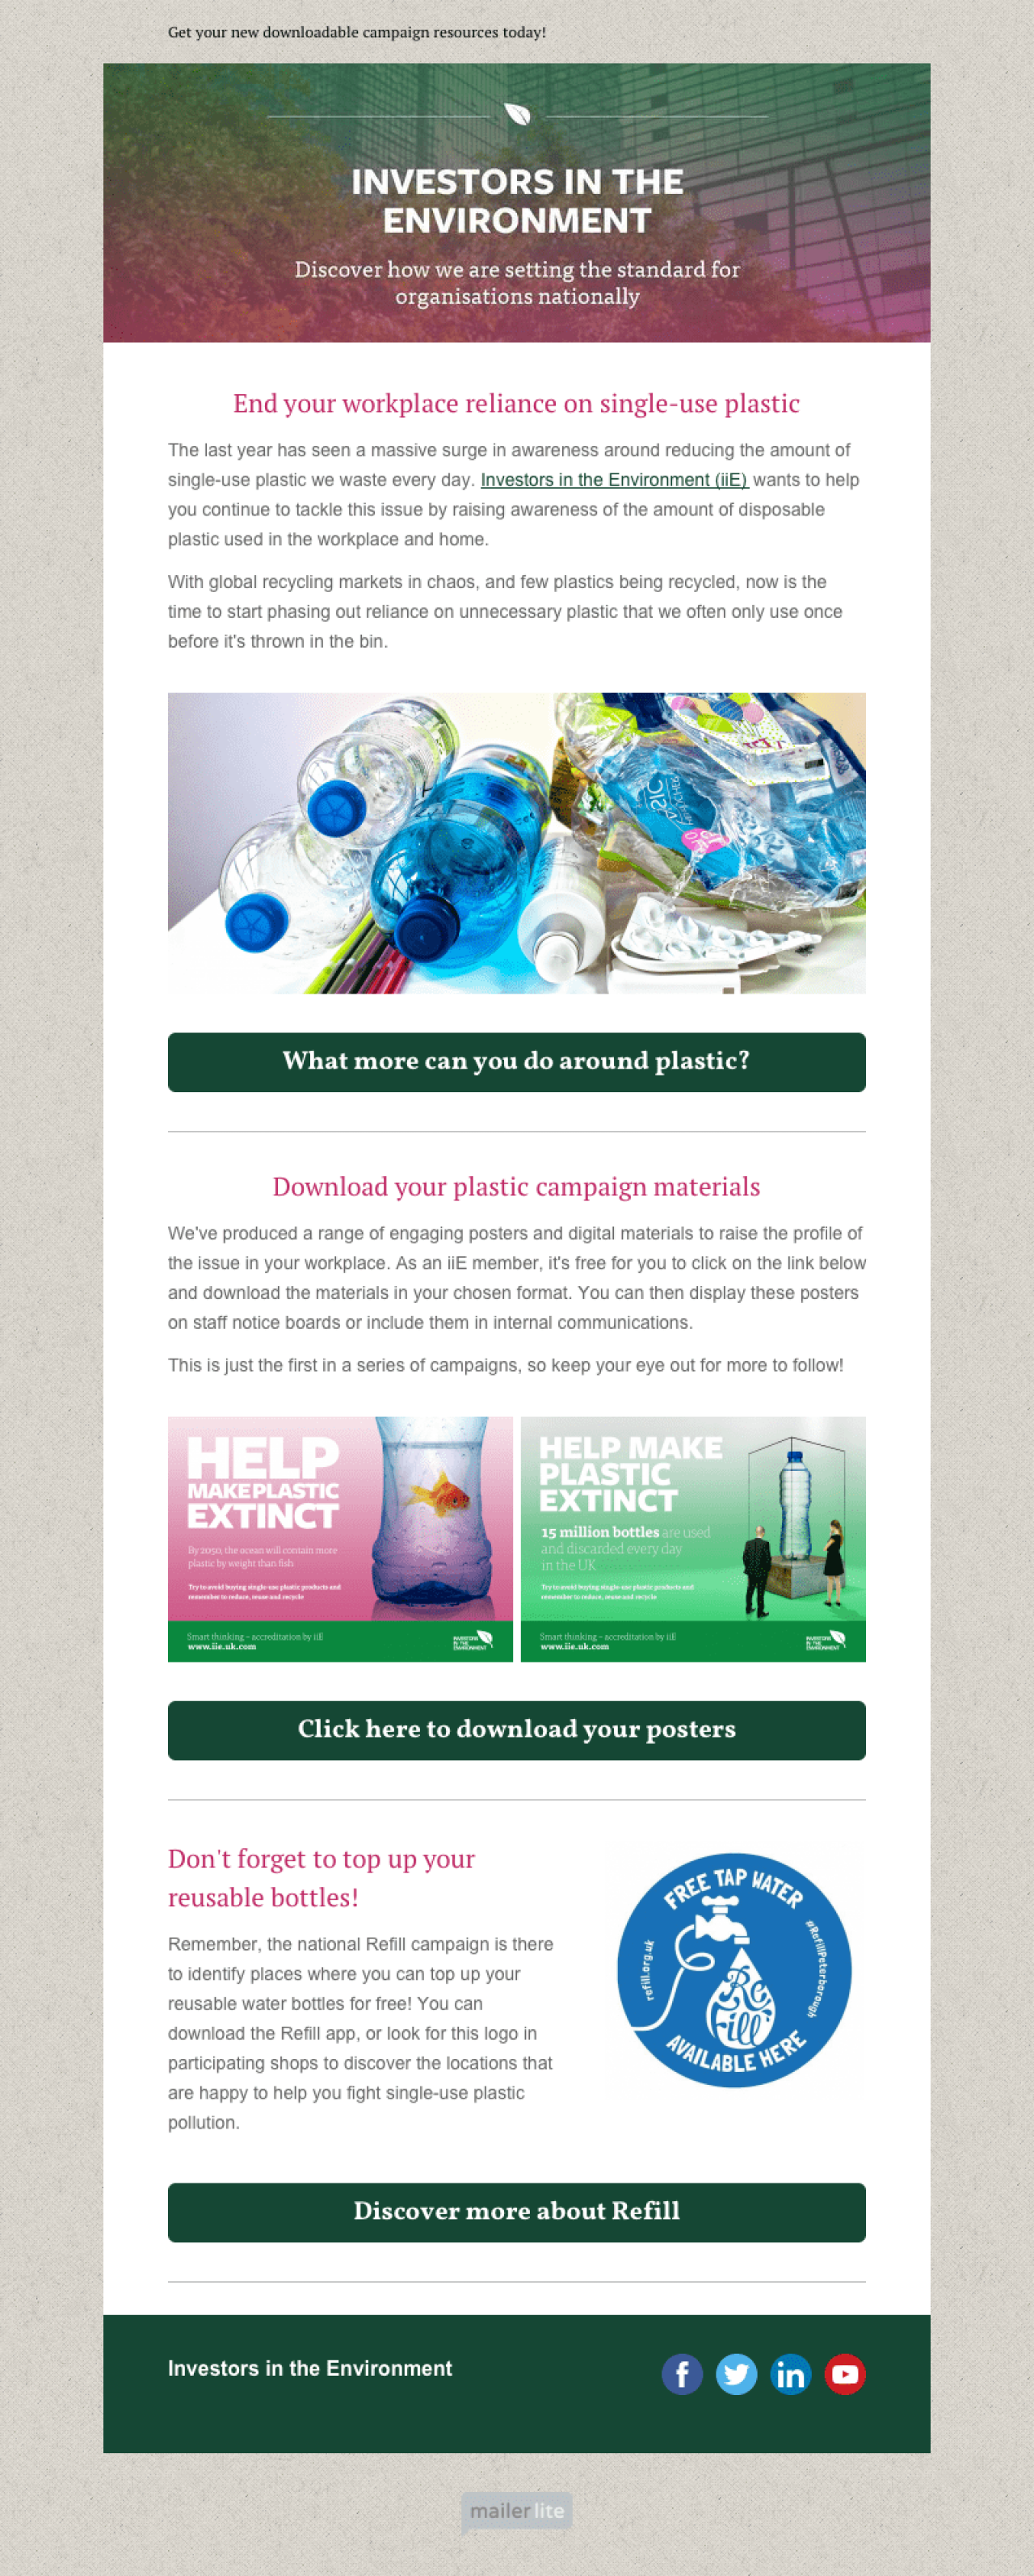 PECT nonprofit newsletter example example - Made with MailerLite